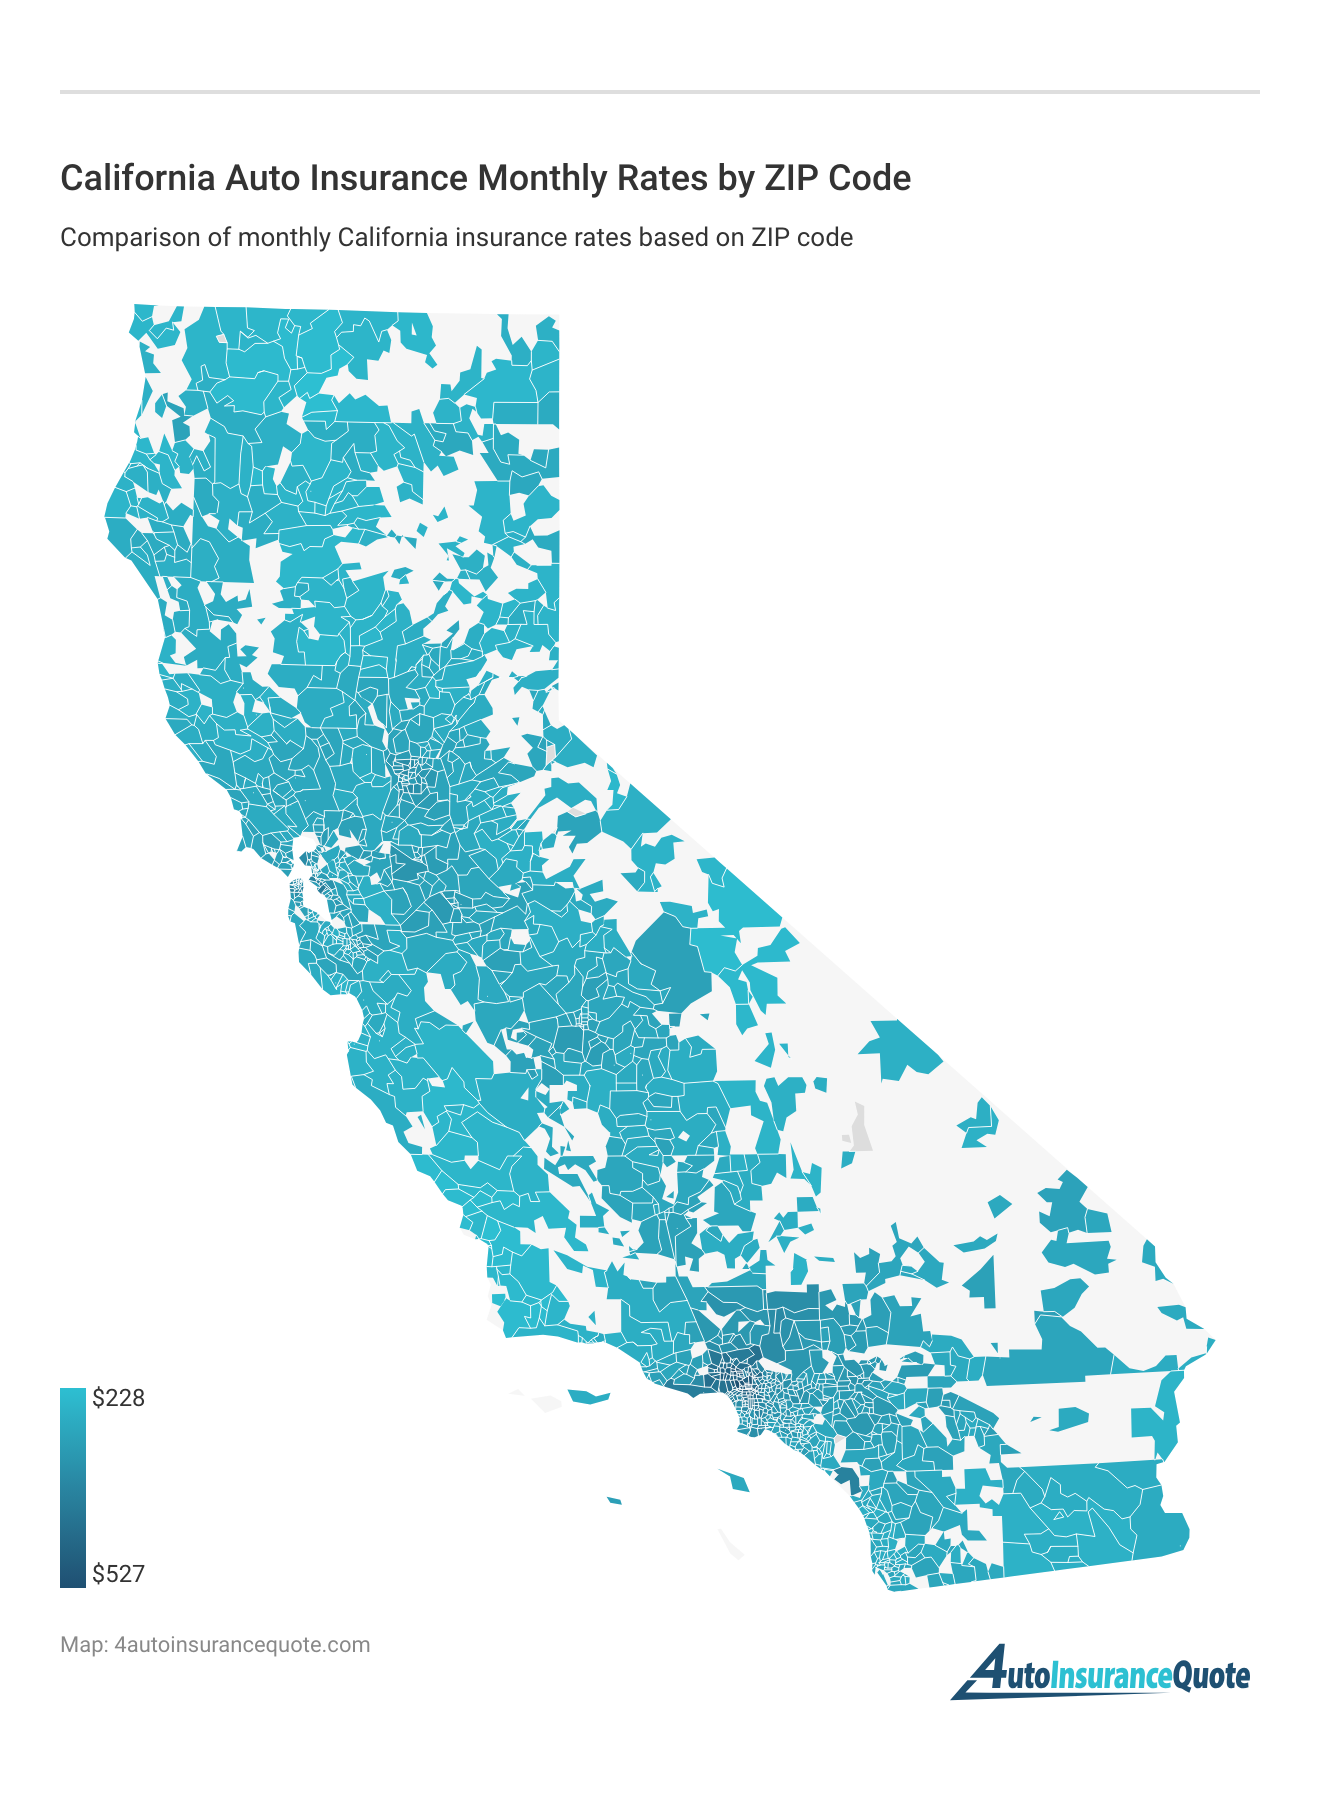 <h3>California Auto Insurance Monthly Rates by ZIP Code</h3>